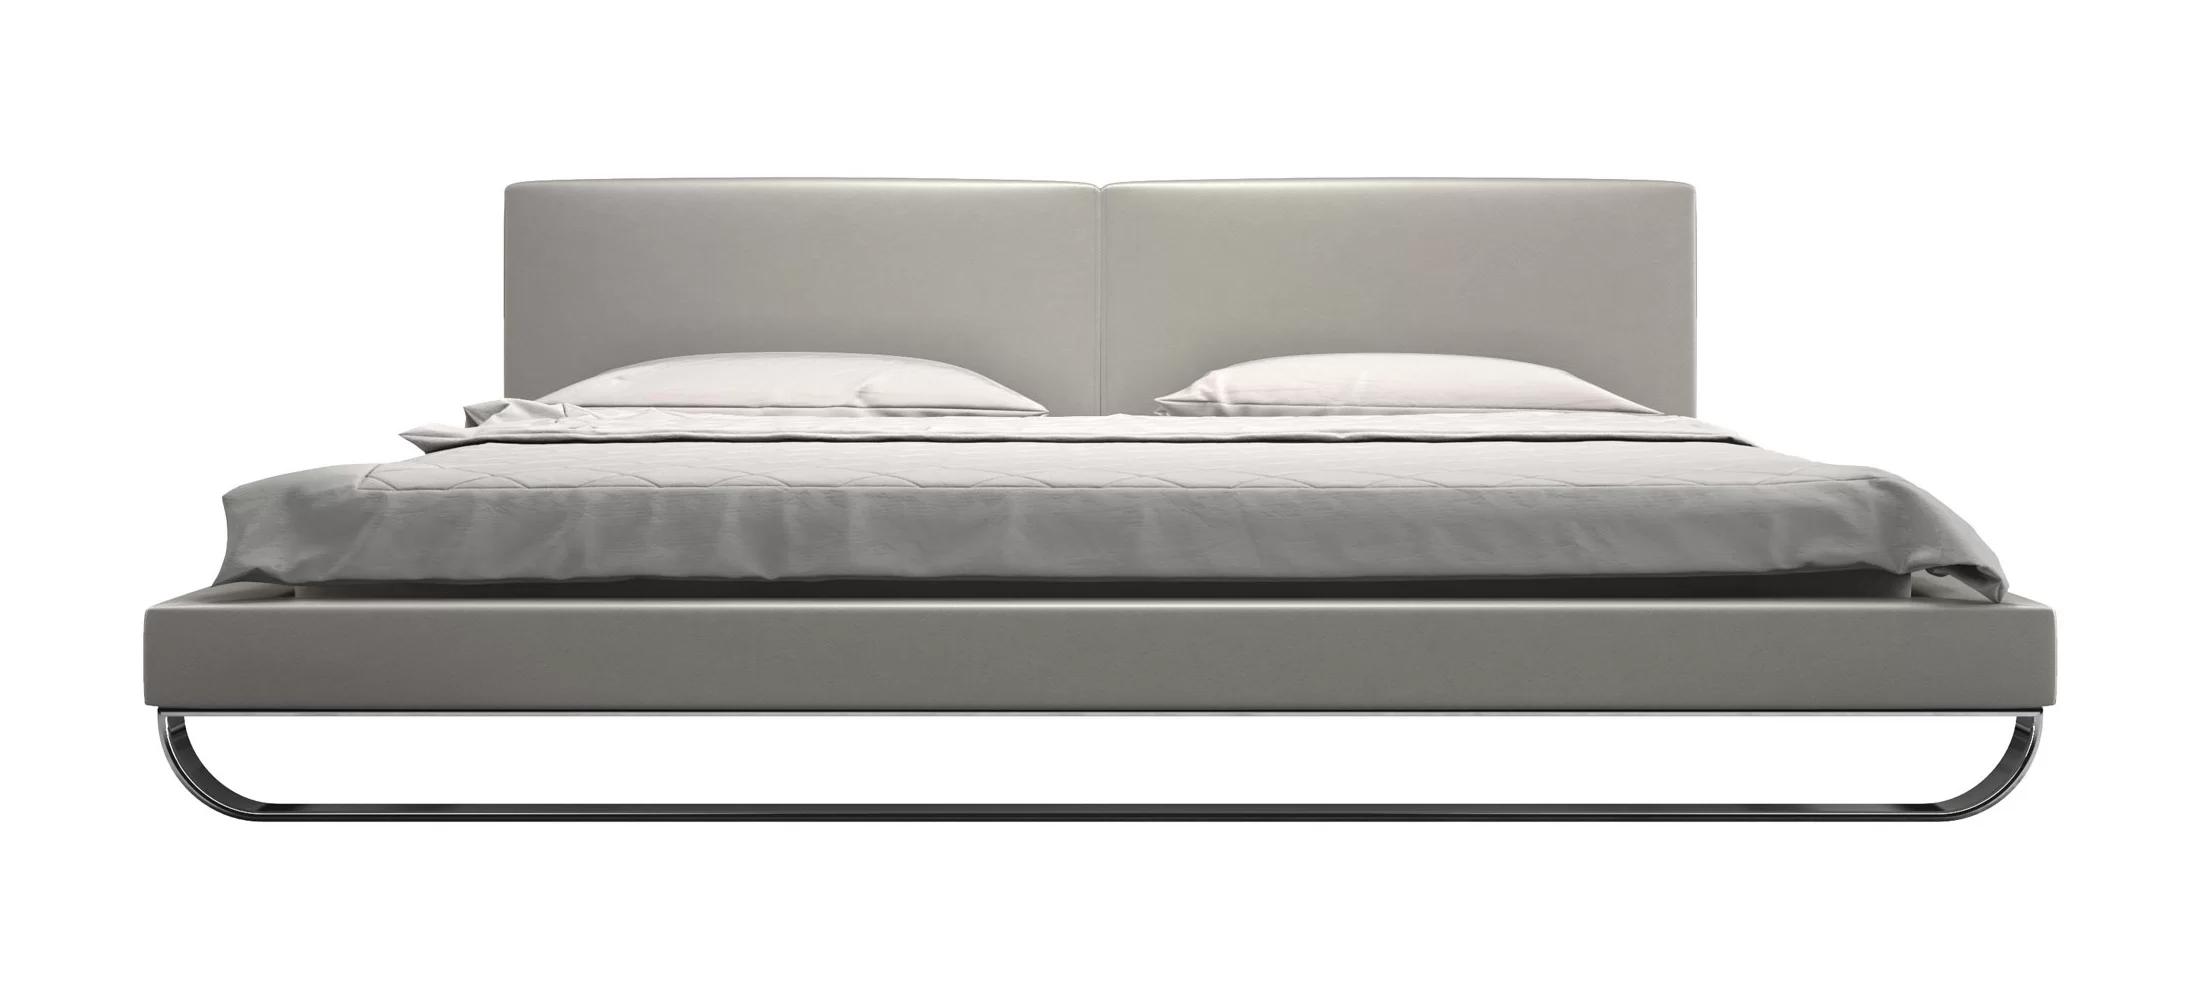 Contemporary, Modern Panel Bed Ramona VGJY-4016-GRY in Gray Leatherette